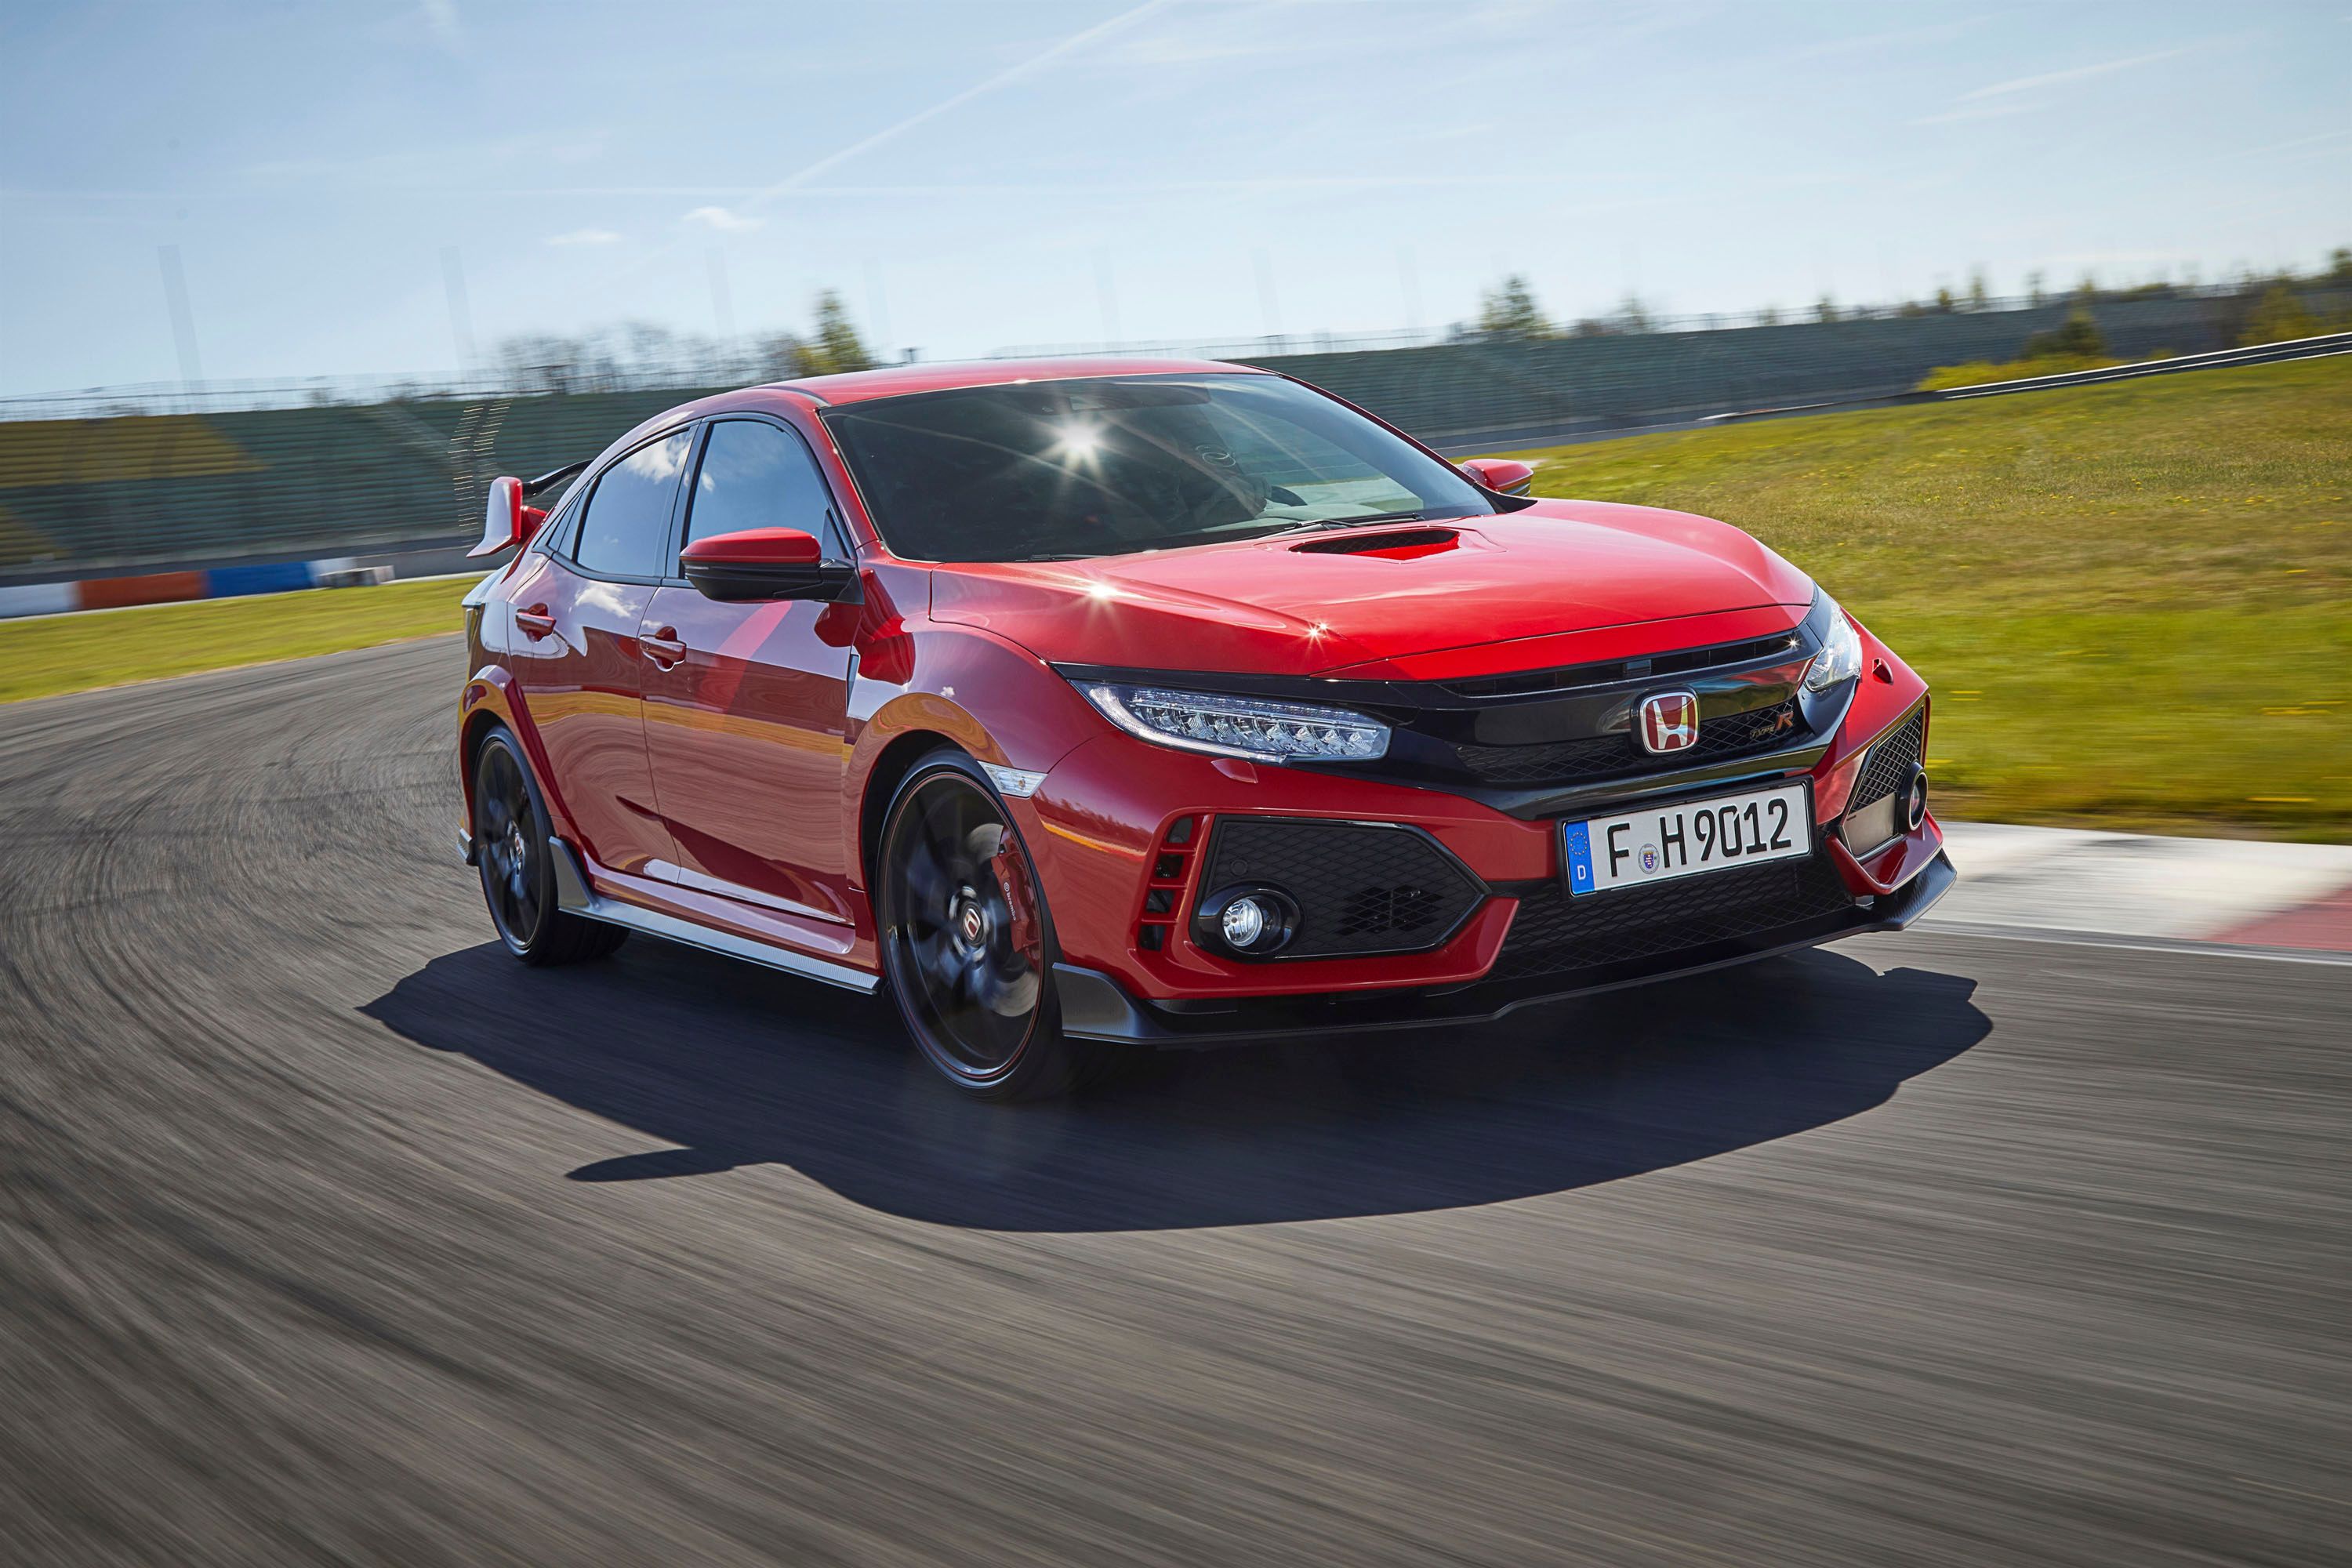 2021 Honda Will Electrify Its Entire Euro Lineup in 2022 - Here's What That Means For The Civic Type R